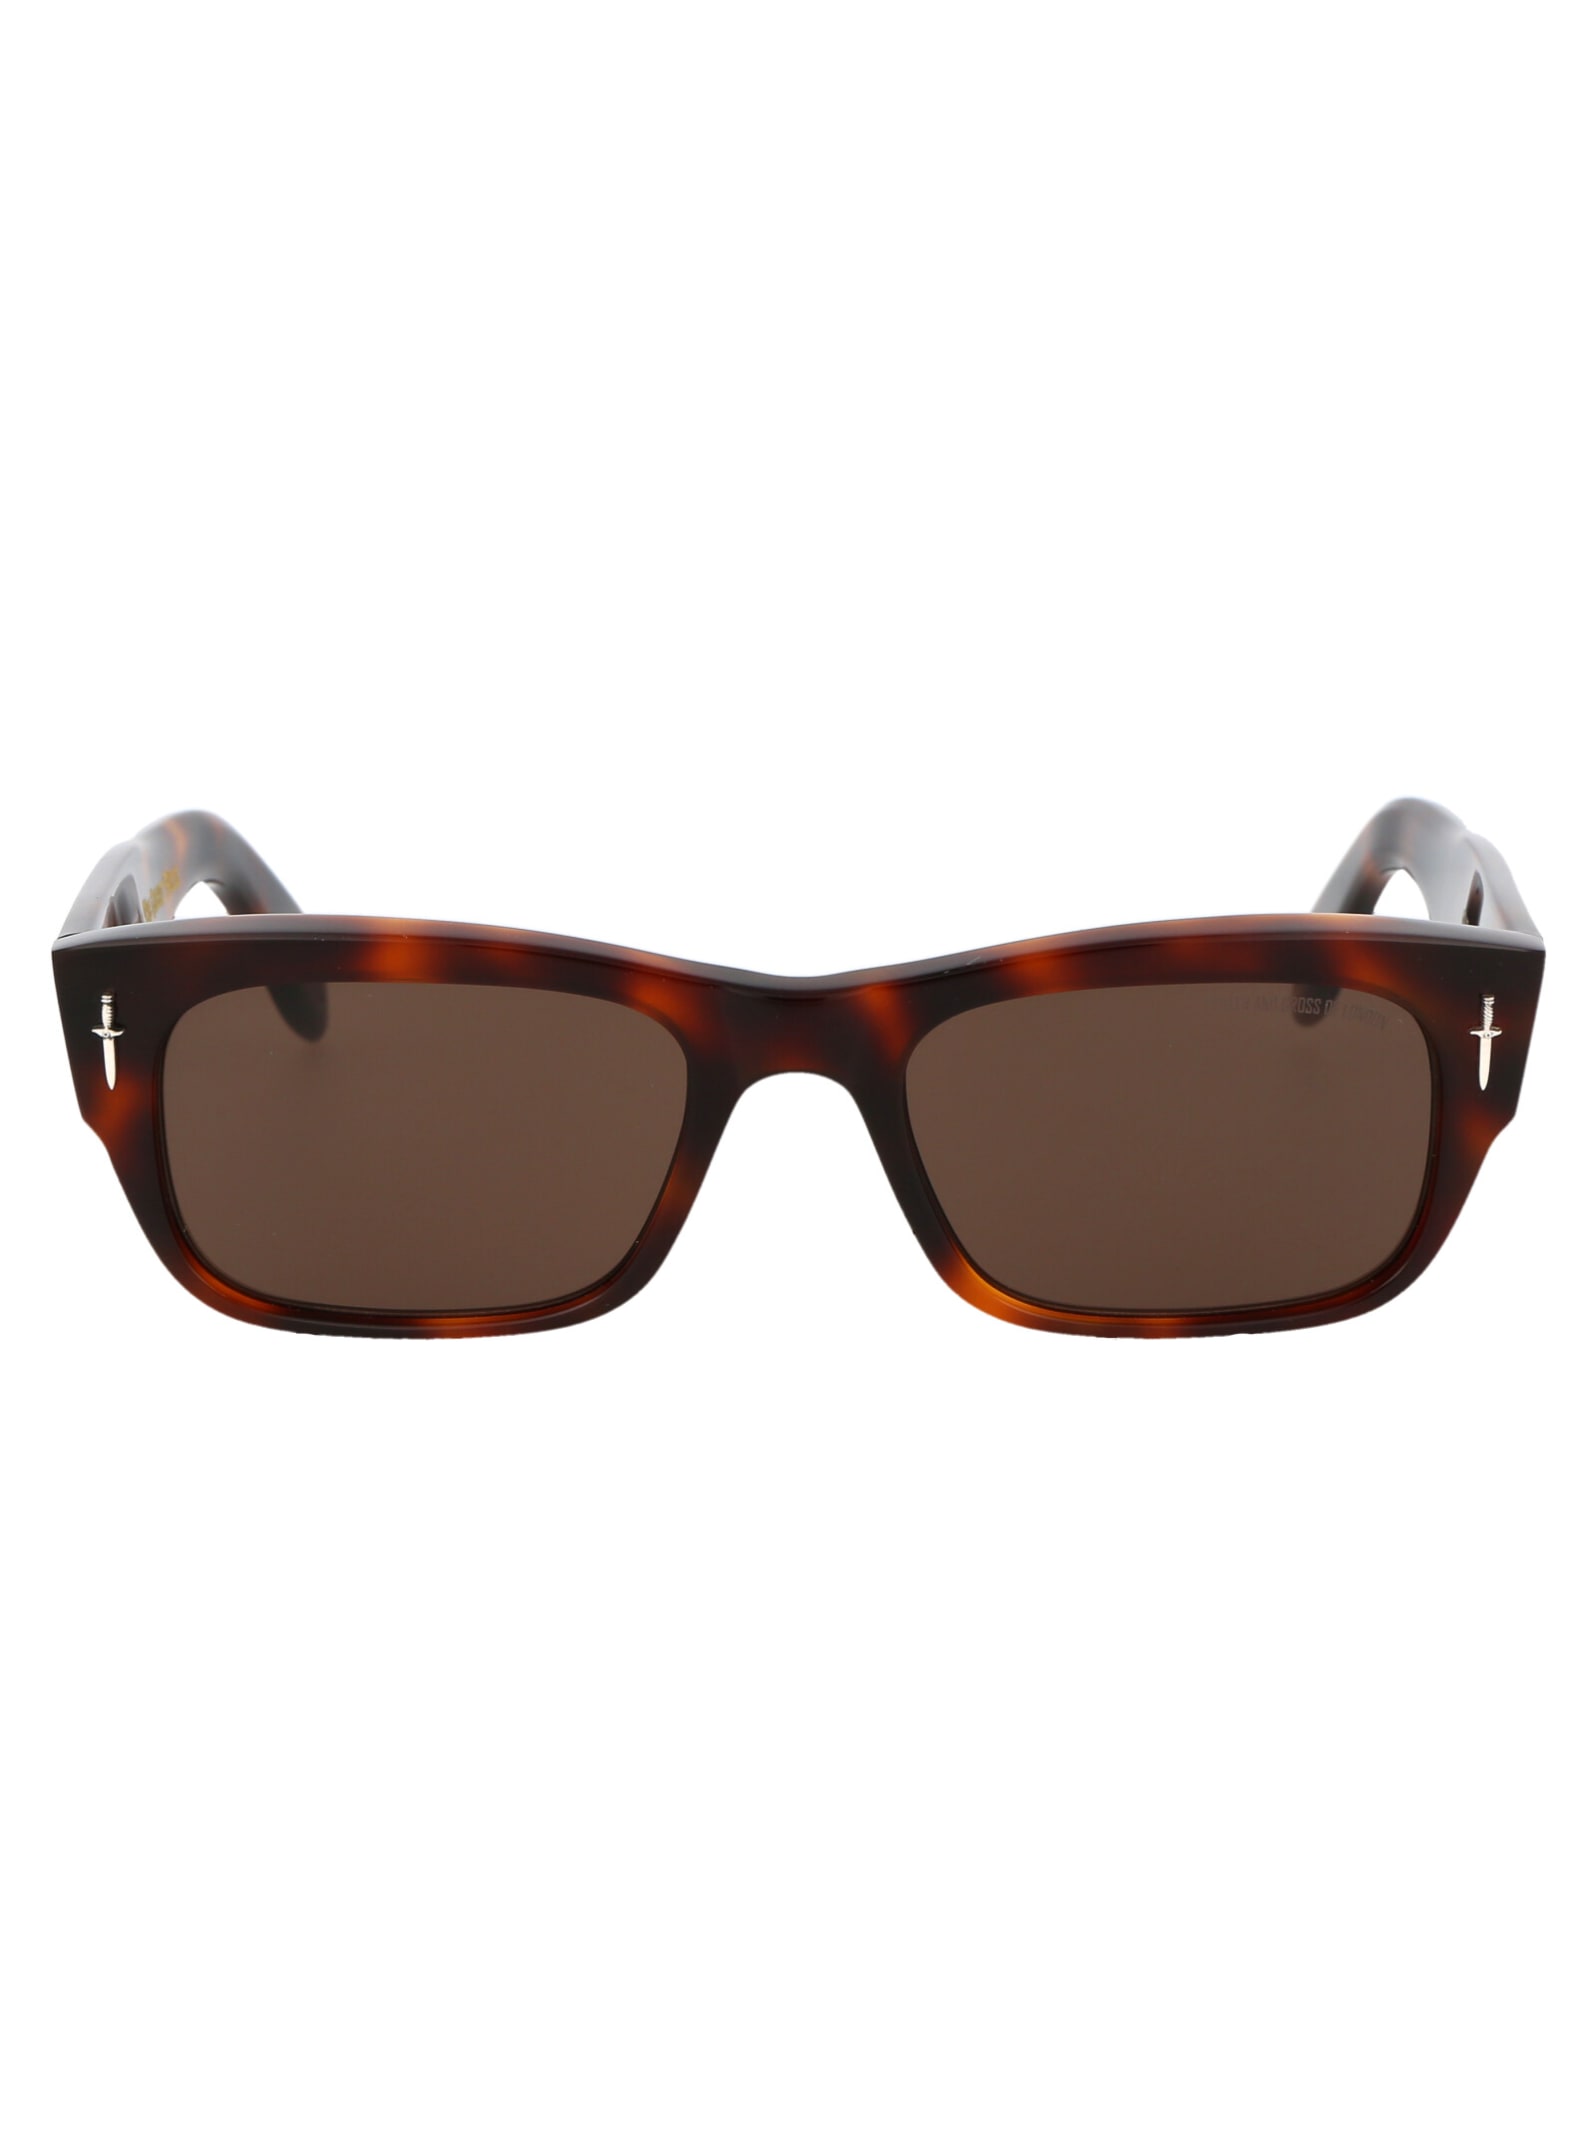 Cutler and Gross The Great Frog - 002 Sunglasses